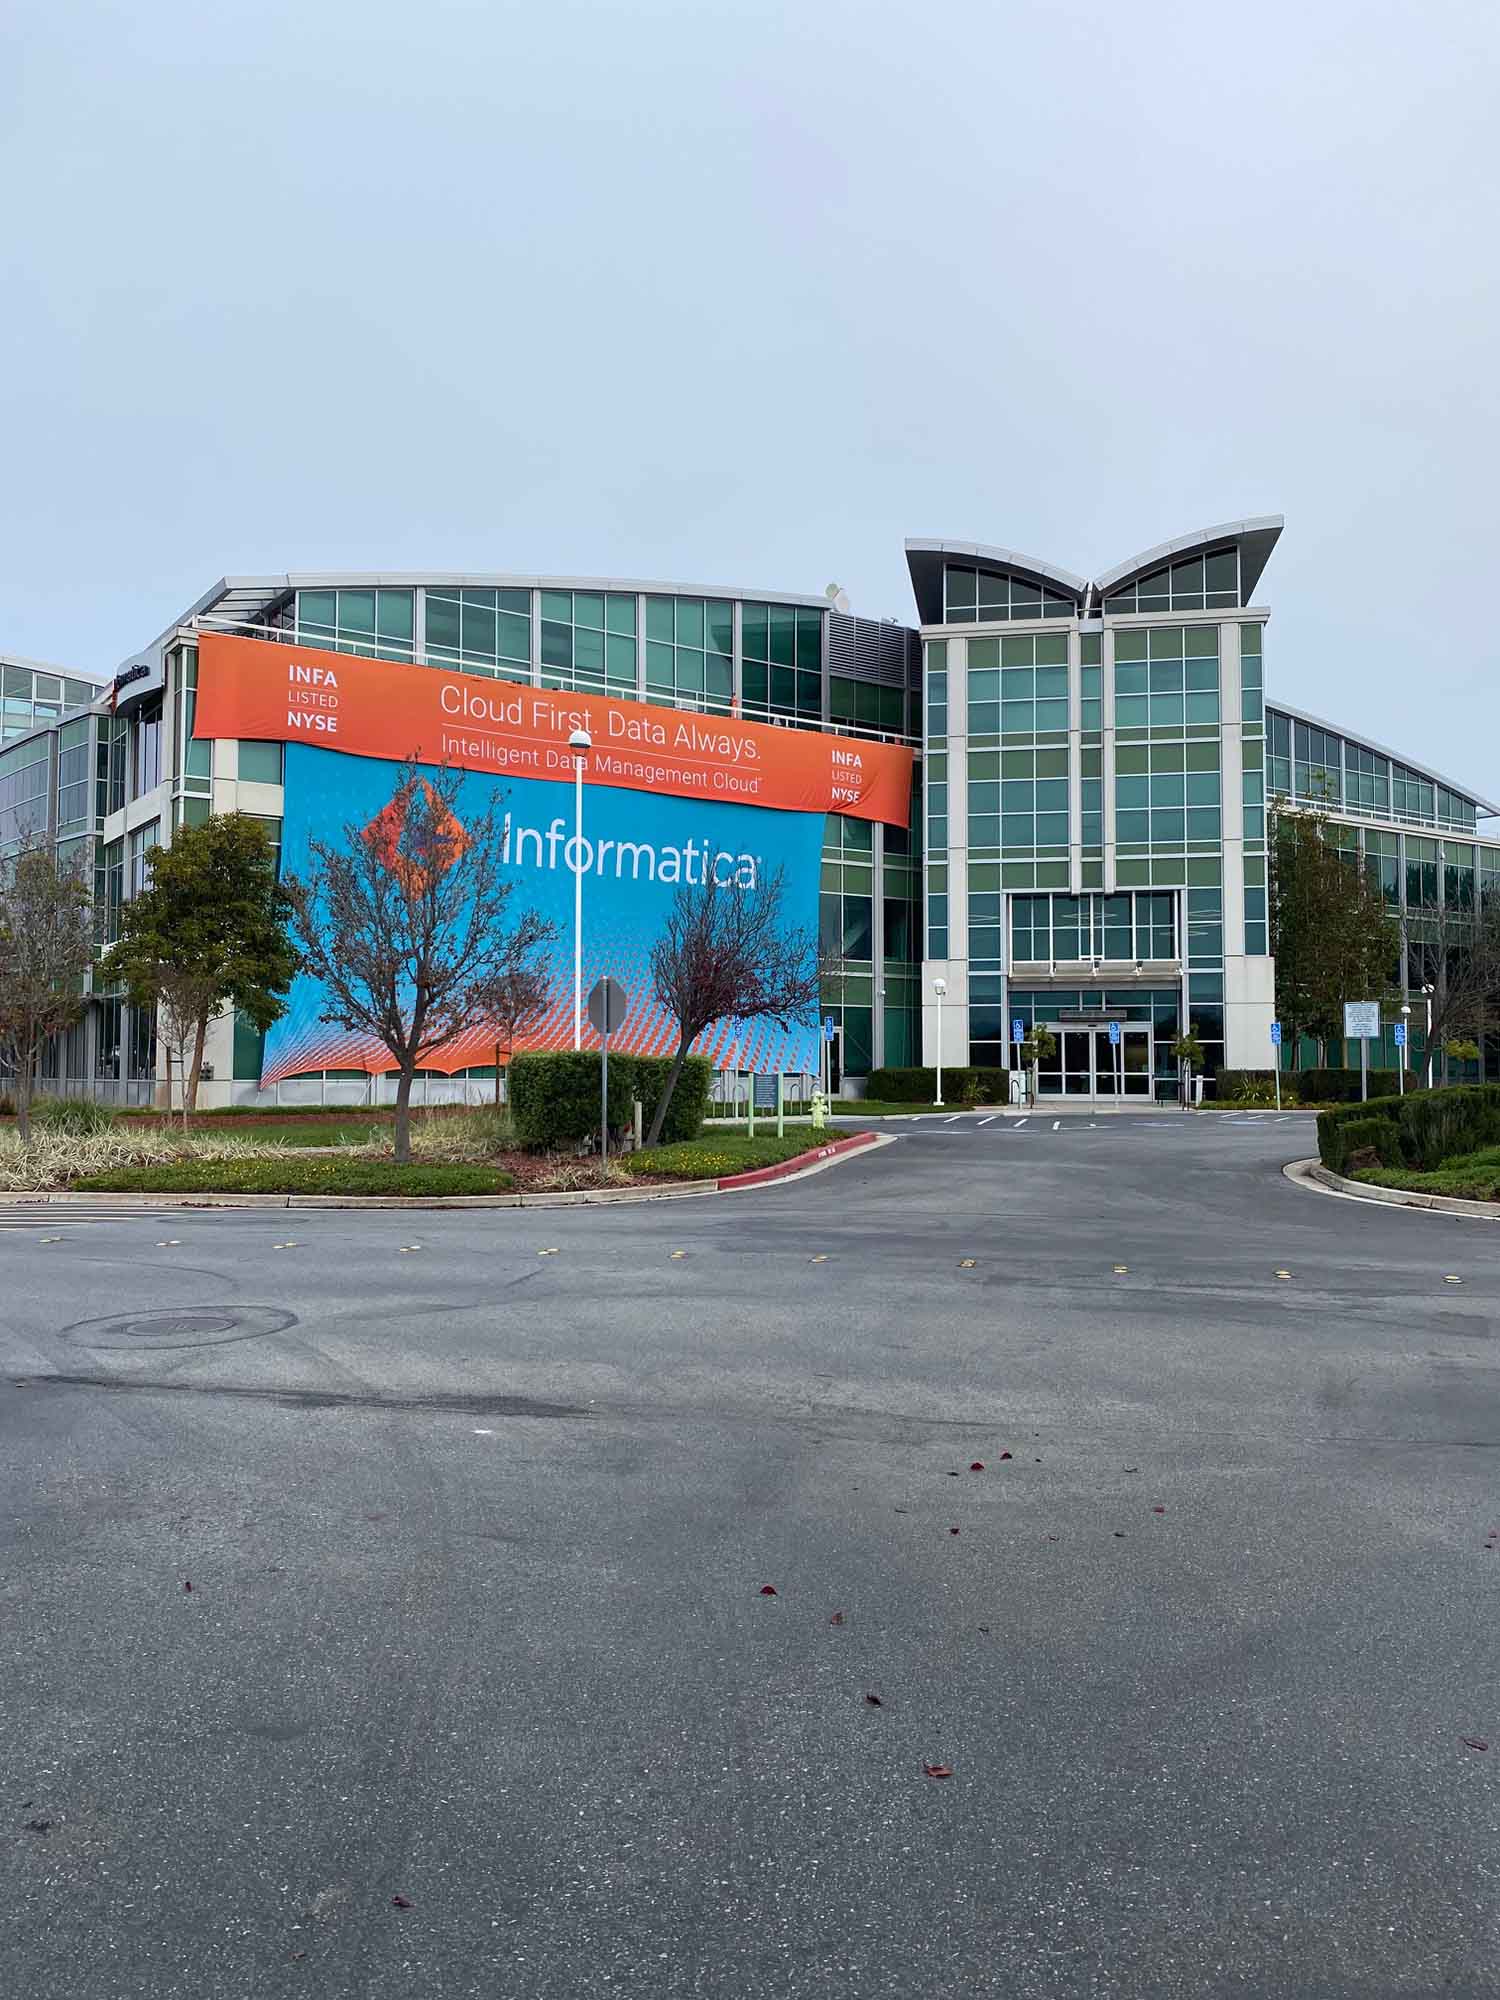 Commercial 3M Prestige Exterior Window Film Project: Informatica, Redwood City, CA, installed by ClimatePro.